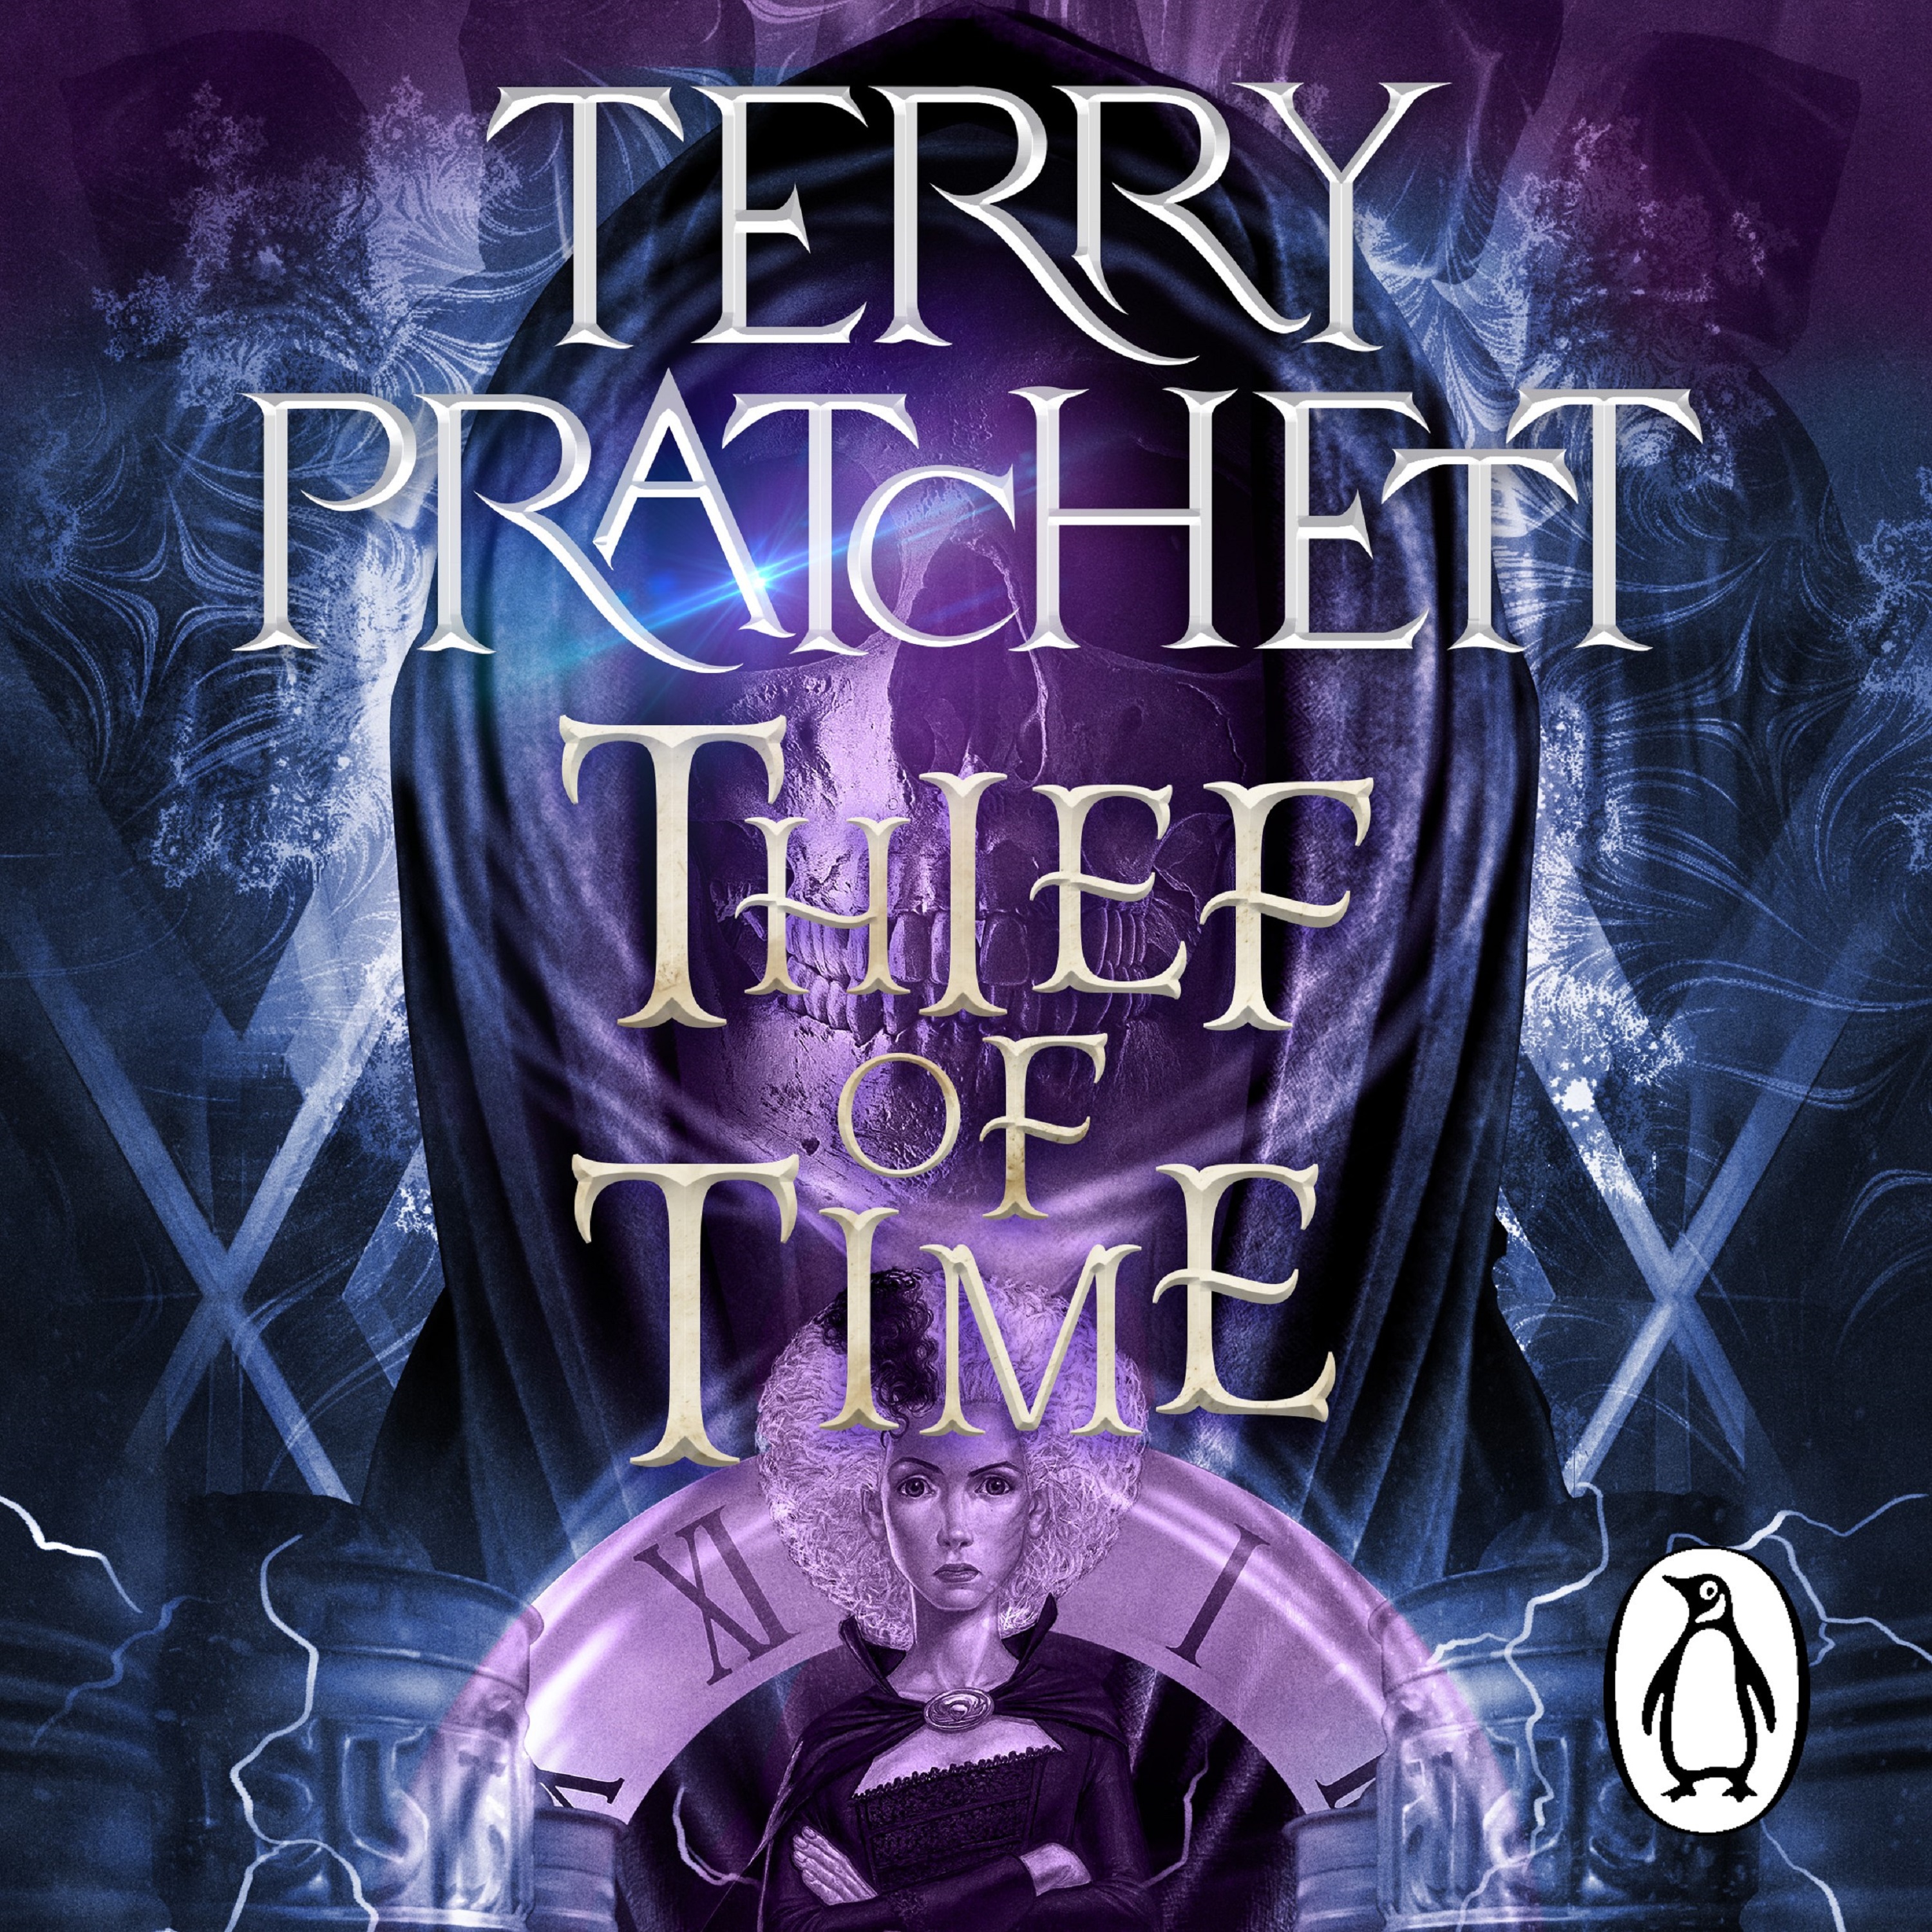 Audiobook image for Thief of Time: a blue colour palette, with Death's face in the background, and a purple clock face at the bottom. Terry Pratchett's name and the title are in large silver font across the centre.